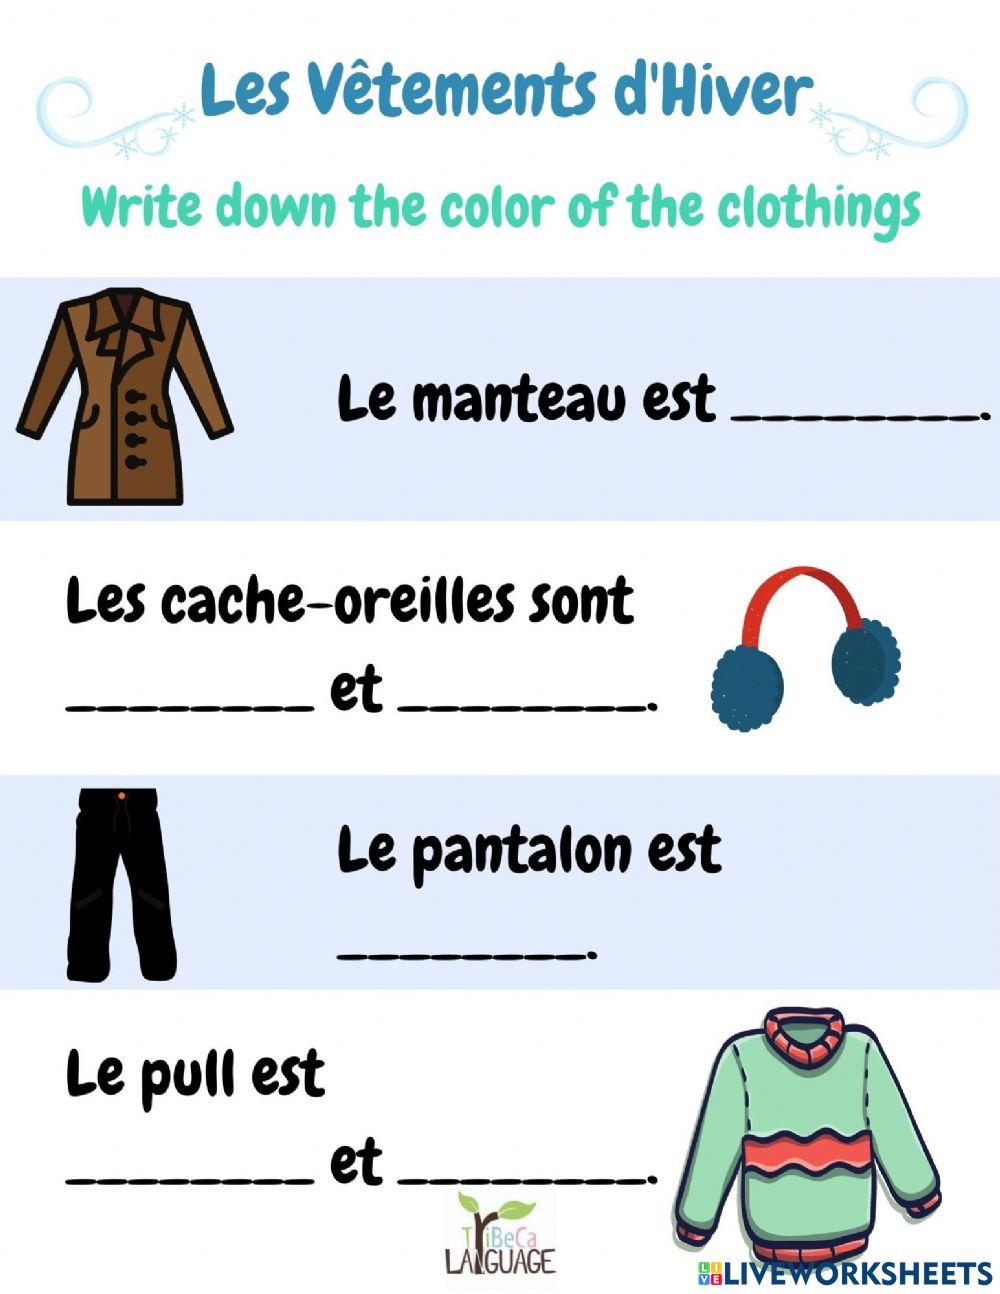 French-WinterClothes-ColorApplication online exercise for | Live Worksheets